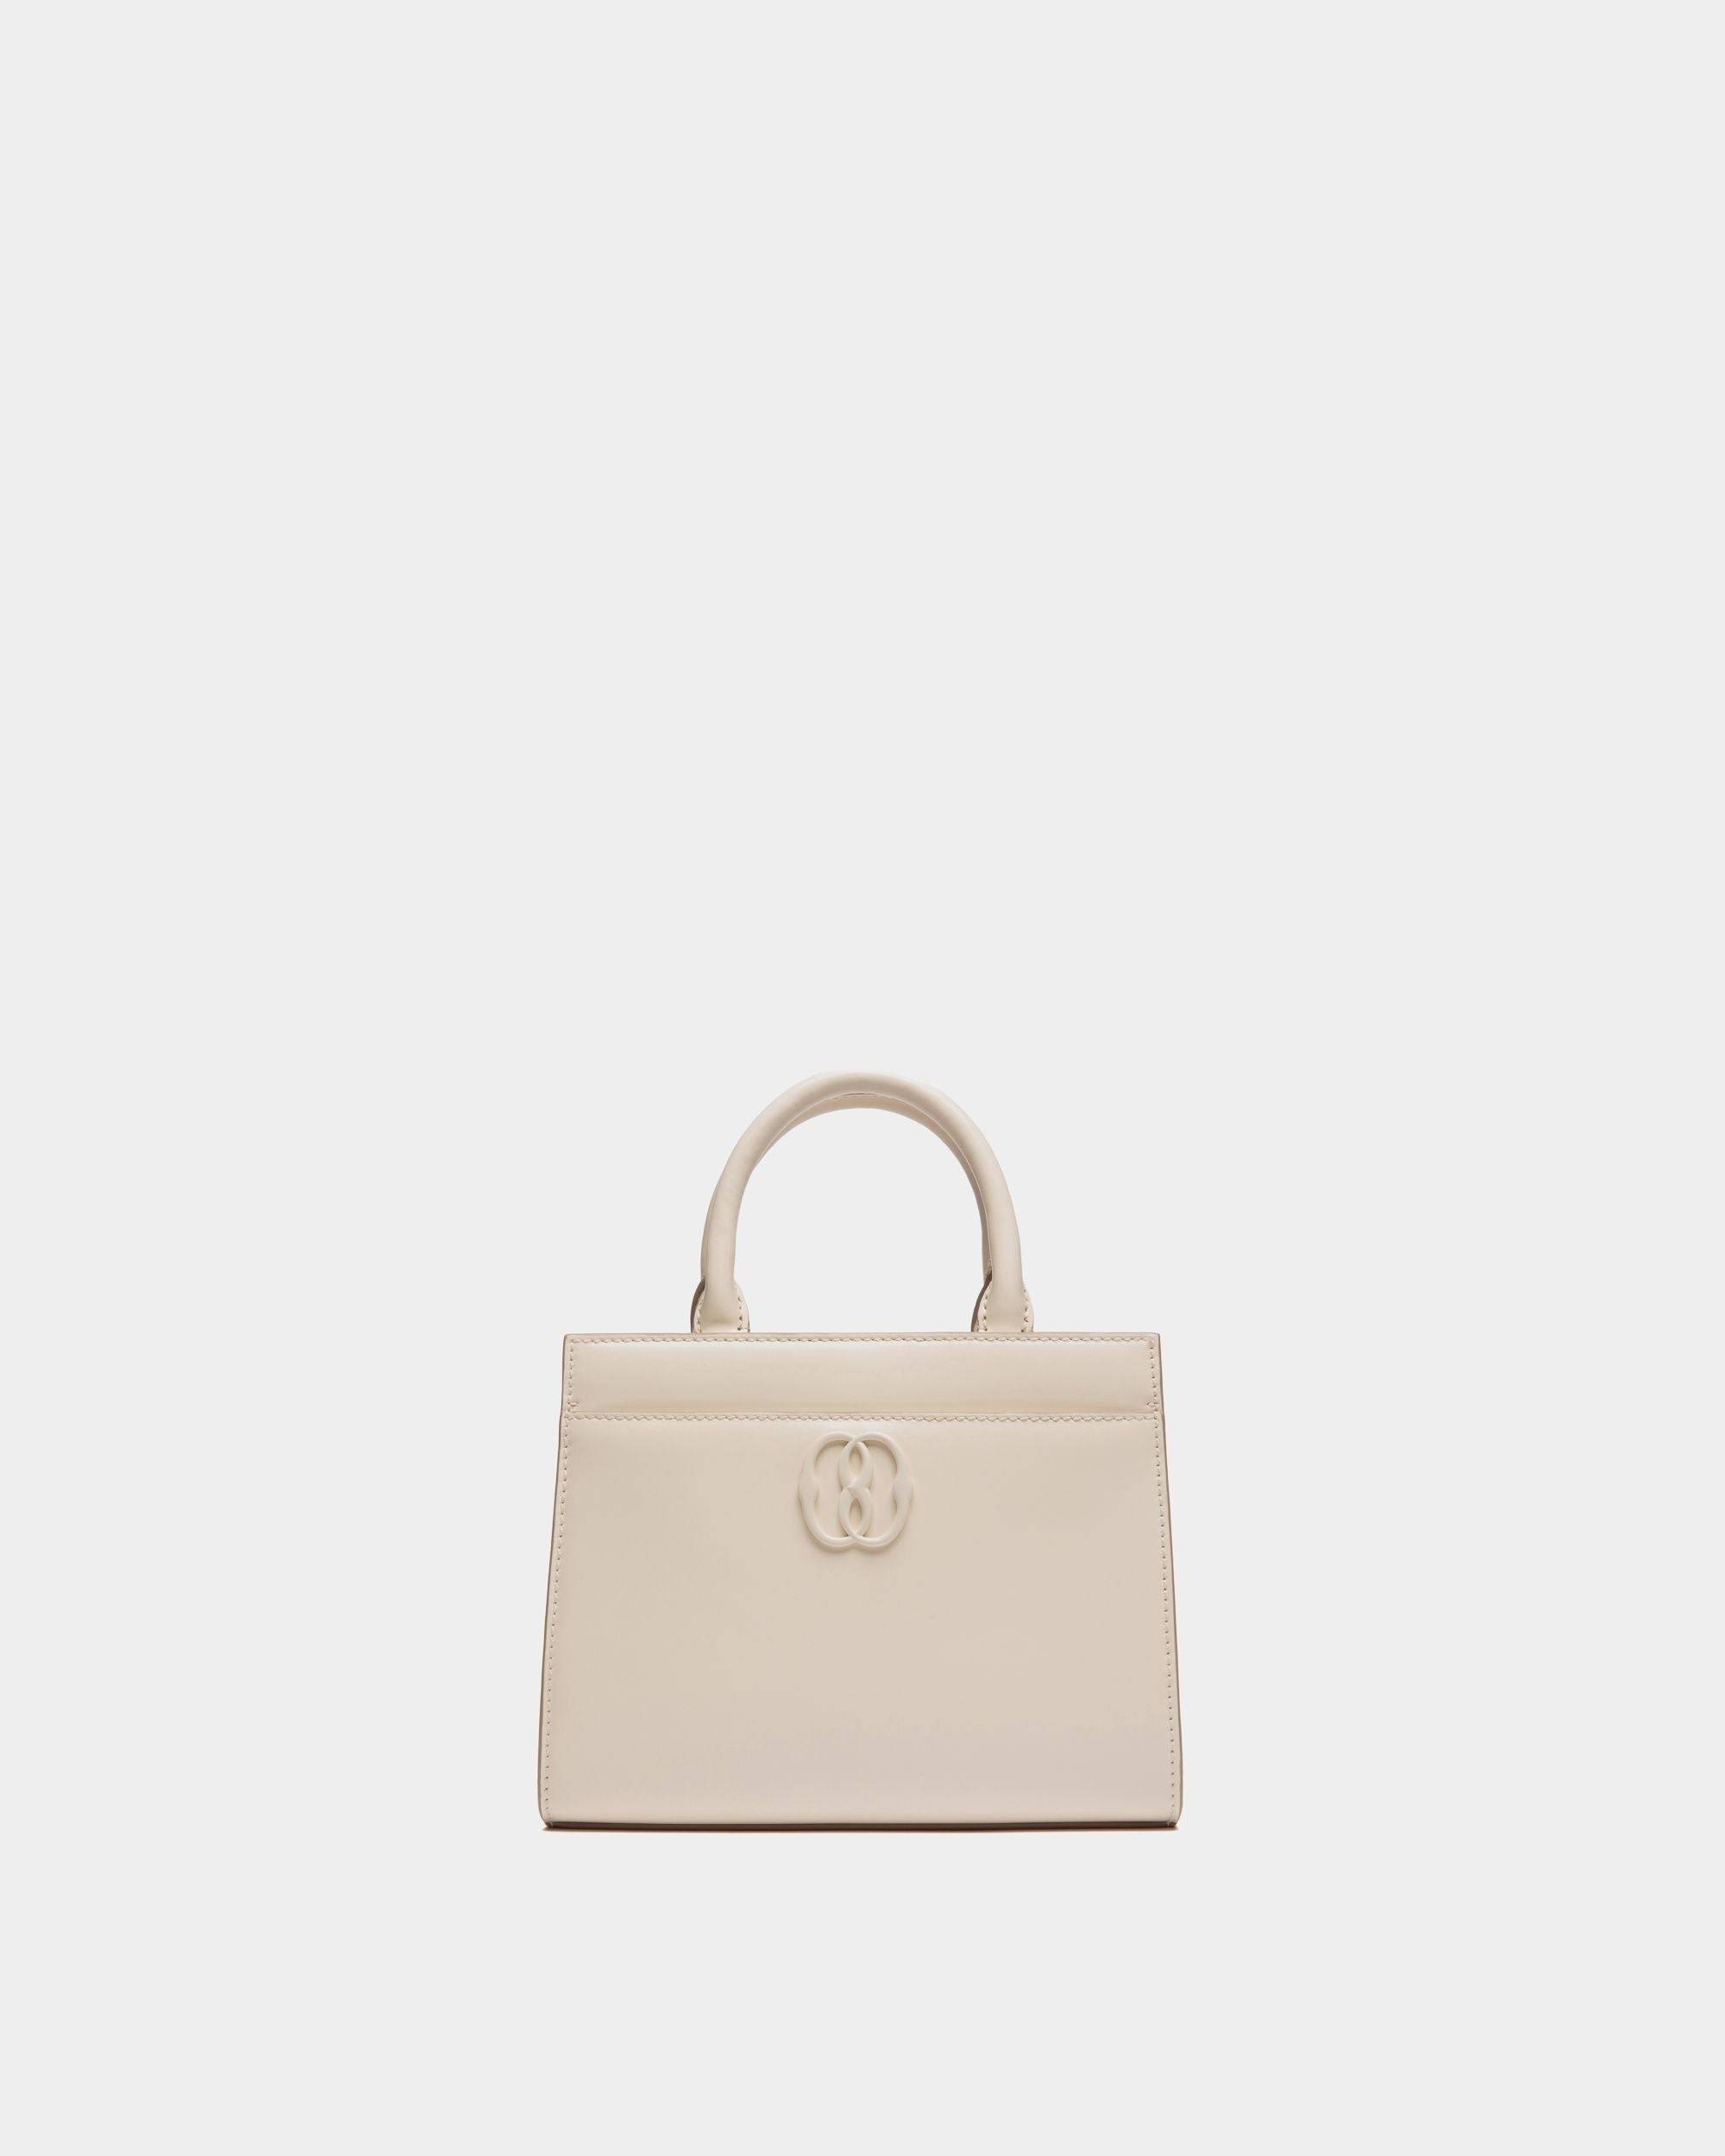 Women's Emblem Small Tote Bag in White Patent Leather | Bally | Still Life Front